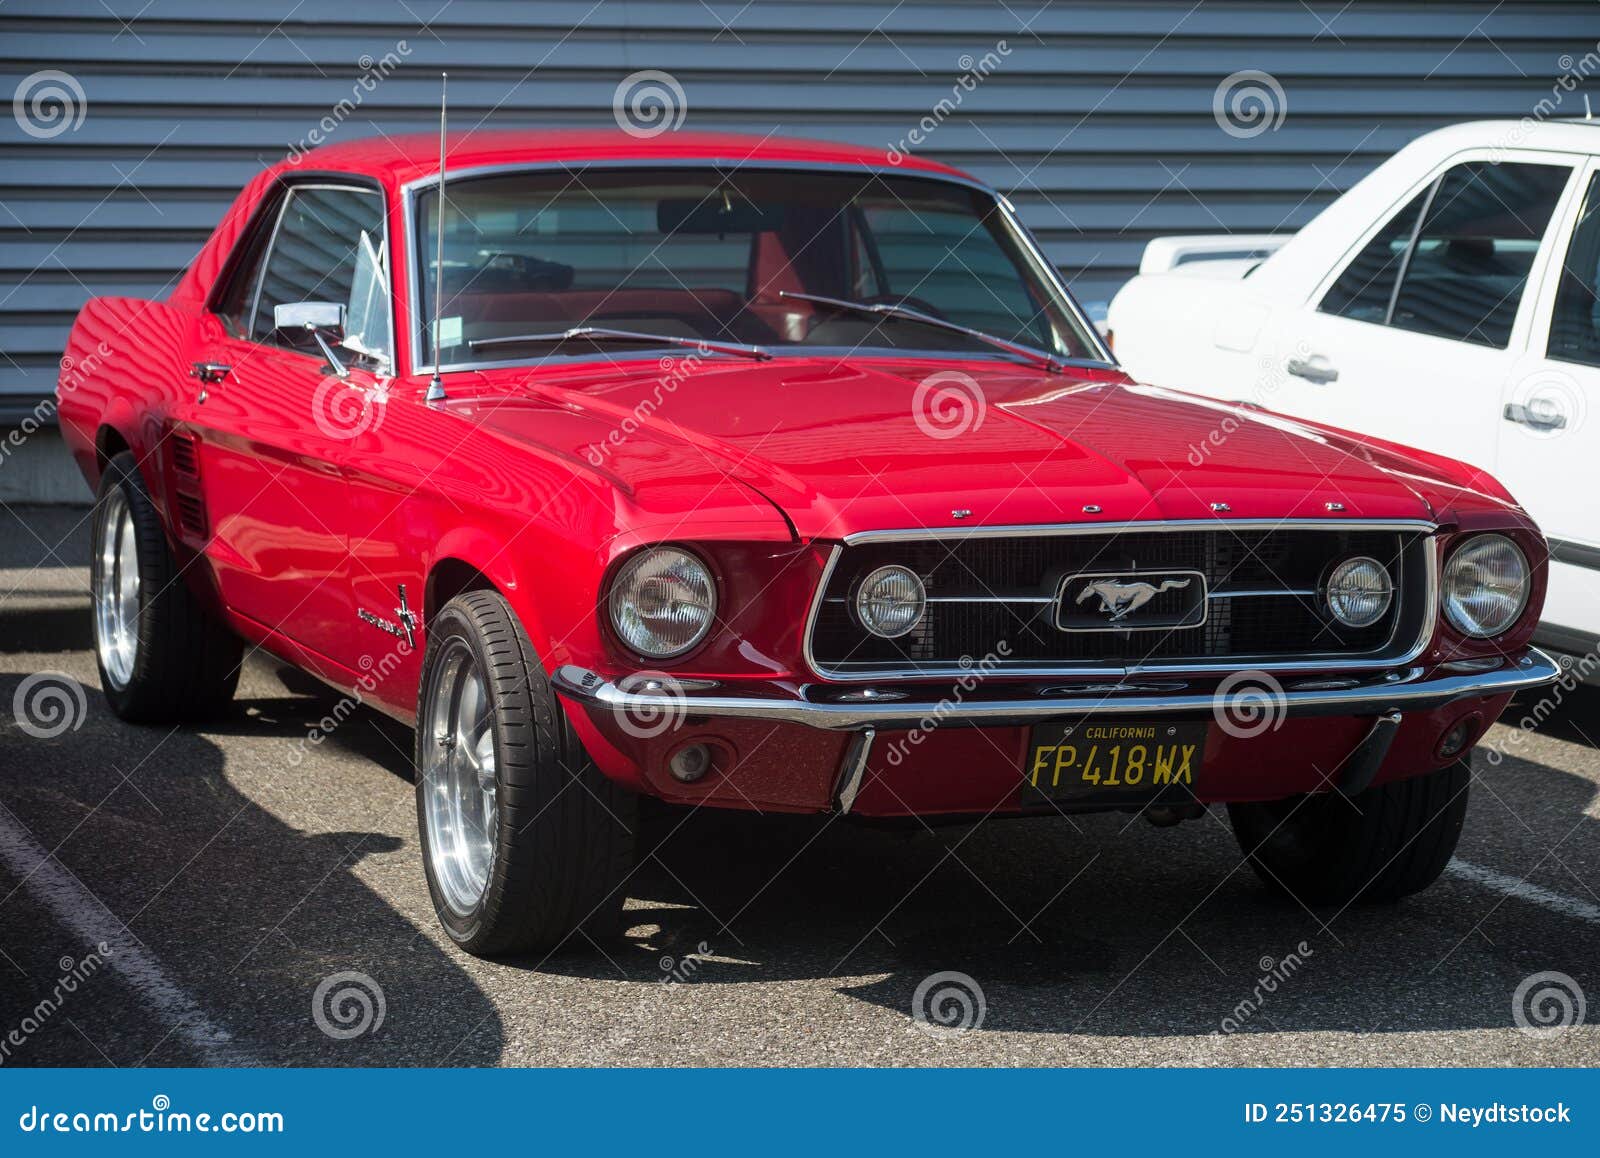 Front View of Ford Mustang 1957 Parked in the Street Editorial Image ...